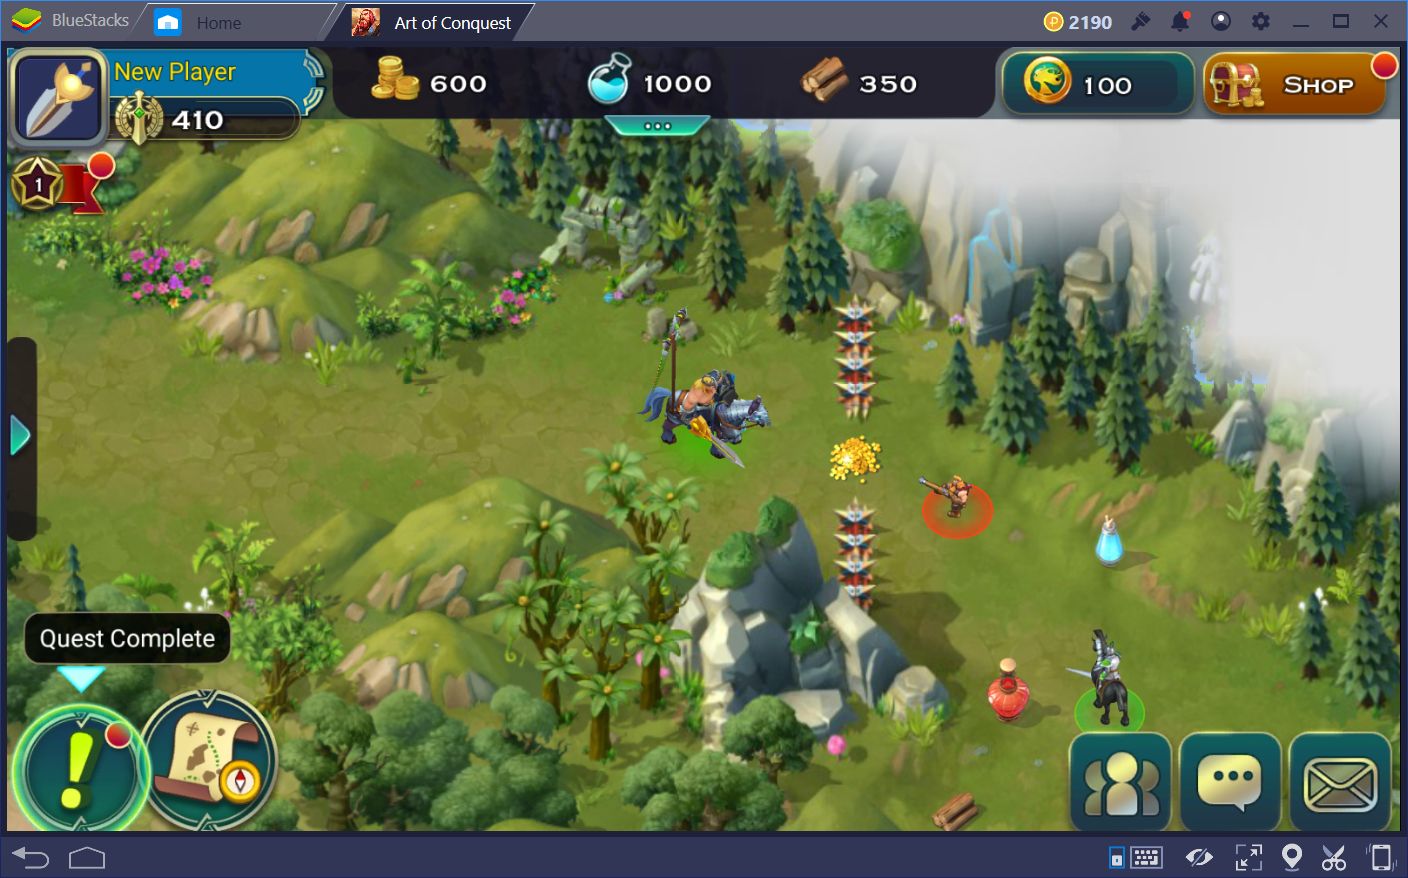 Beginner’s Guide for Art of Conquest